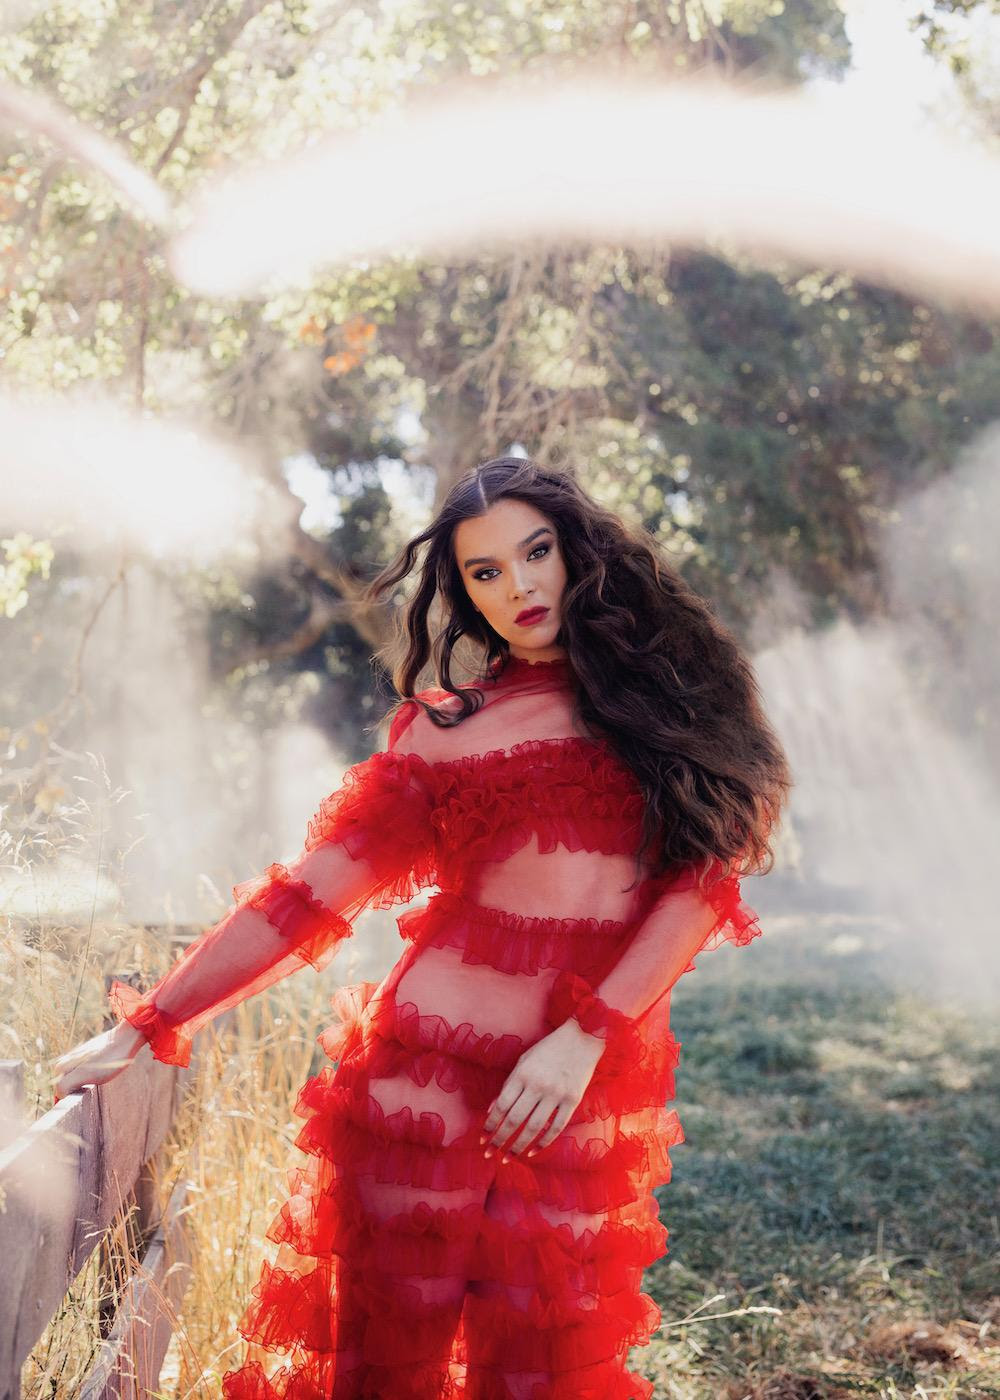 Hailee Steinfeld drops magical music video for “Afterlife”